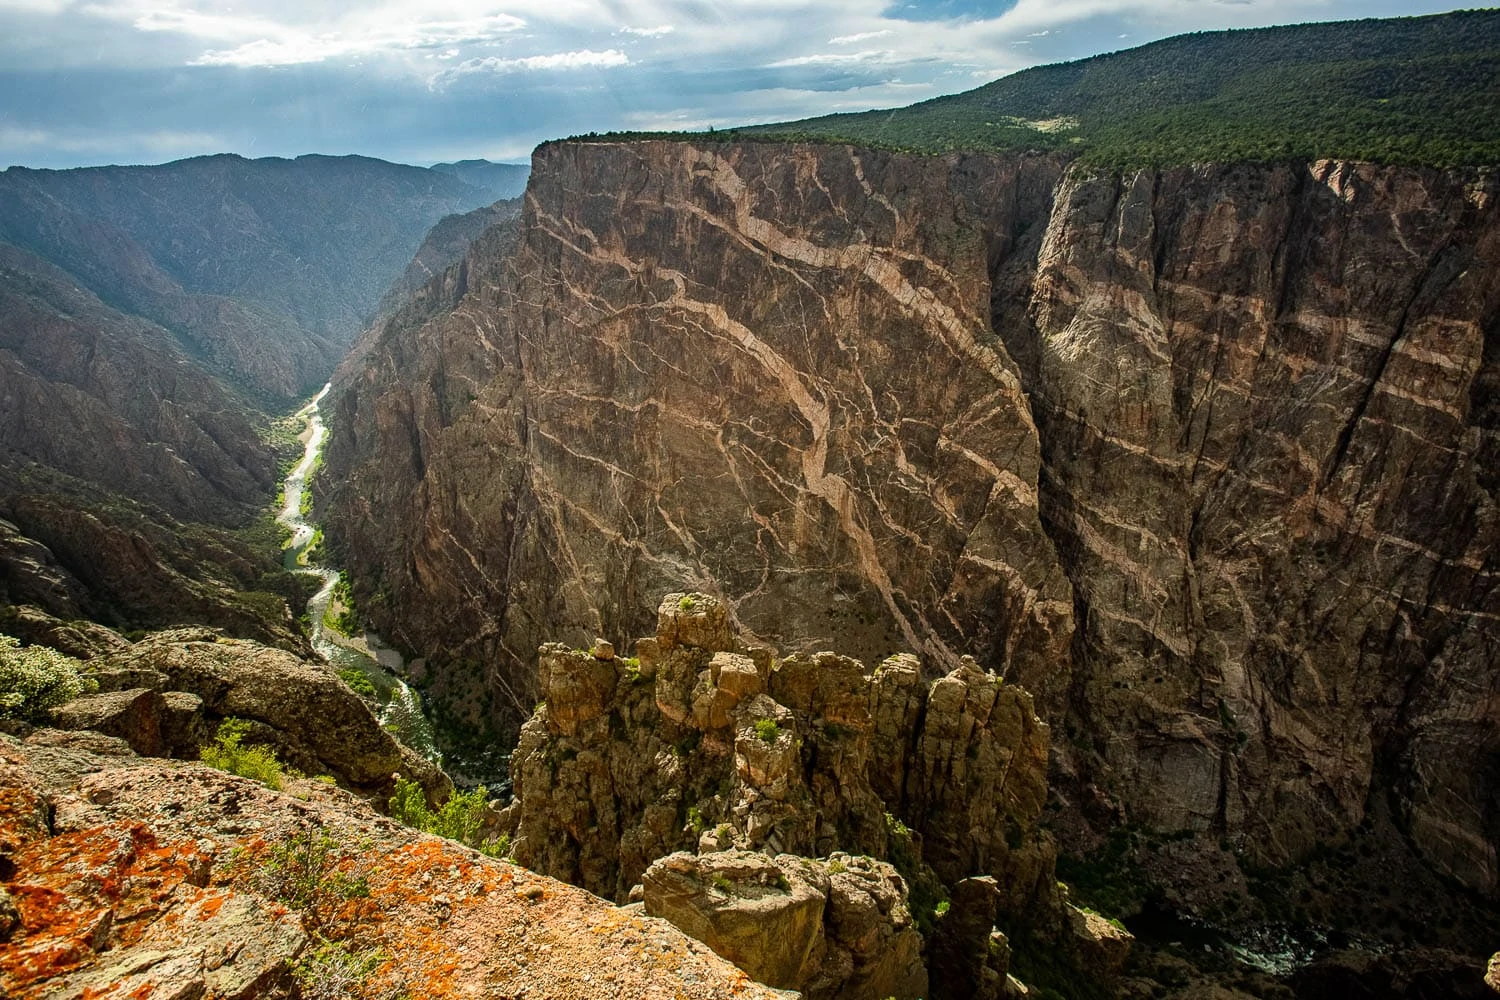 The painted wall at Black Canyon of the Gunnison National Park in colorado.